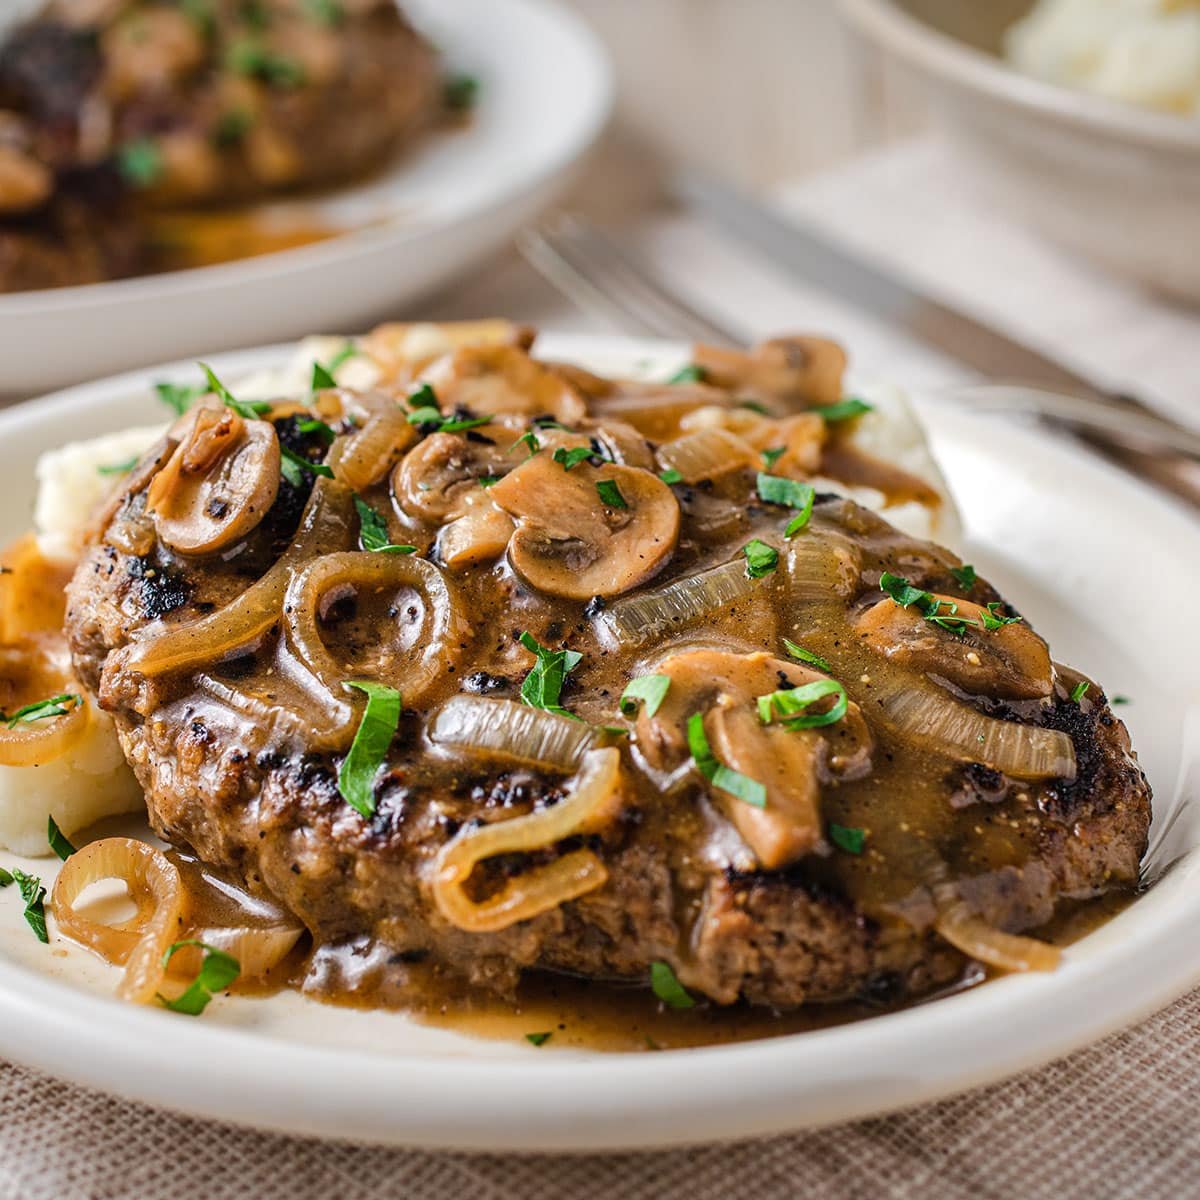 How To Make Salisbury Steak At Home - COOKtheSTORY